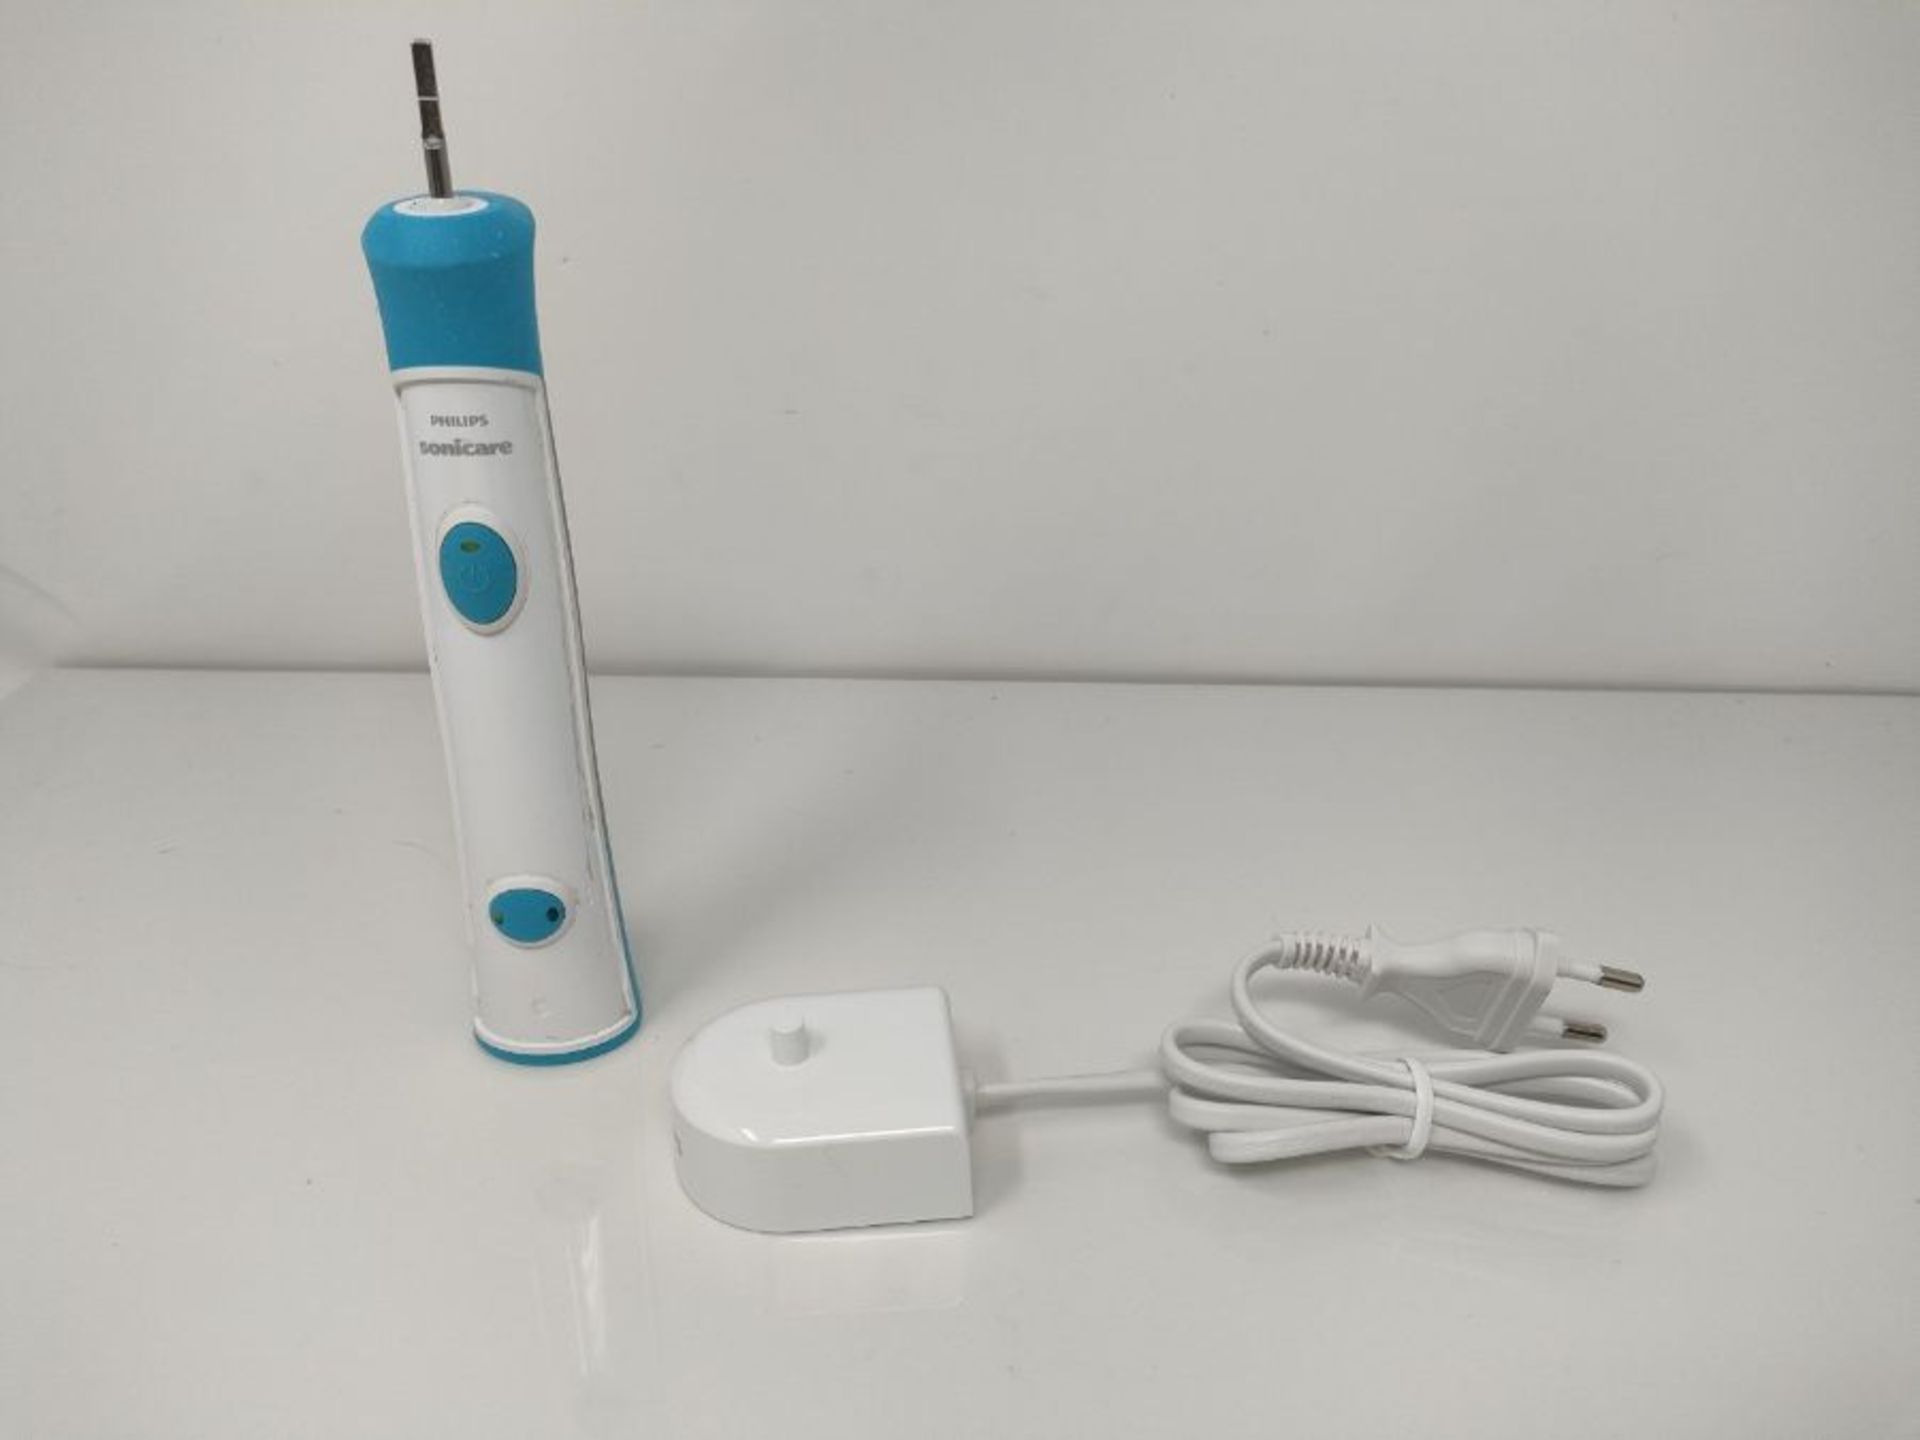 Philips Sonicare For Kids Electric Toothbrush HX6322 / 04, With Sound Technology, For - Image 3 of 3